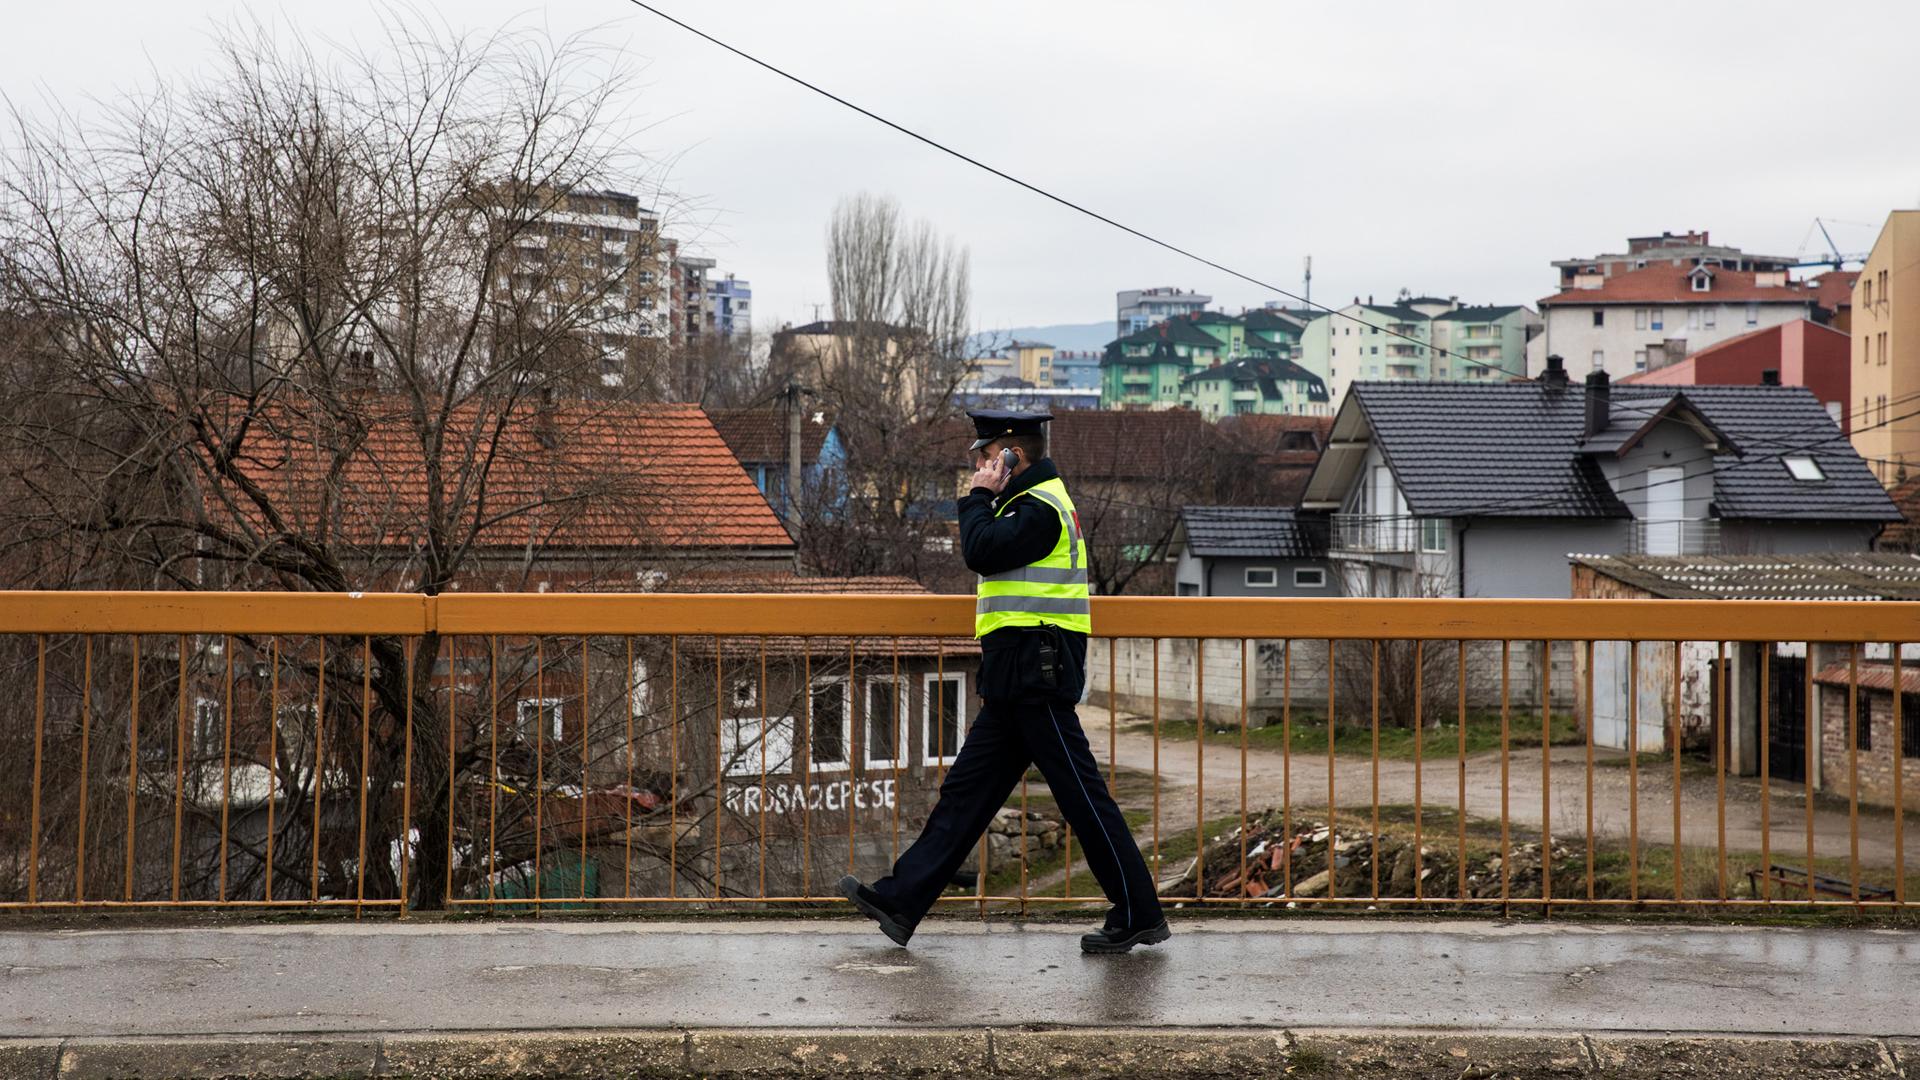 A Kosovo police officer crosses the bridge that connects north and south Mitrovica. The Ibar River serves as a natural divider in Mitrovica, where Serbs live on the northern side of the river and Albanians on the southern side.